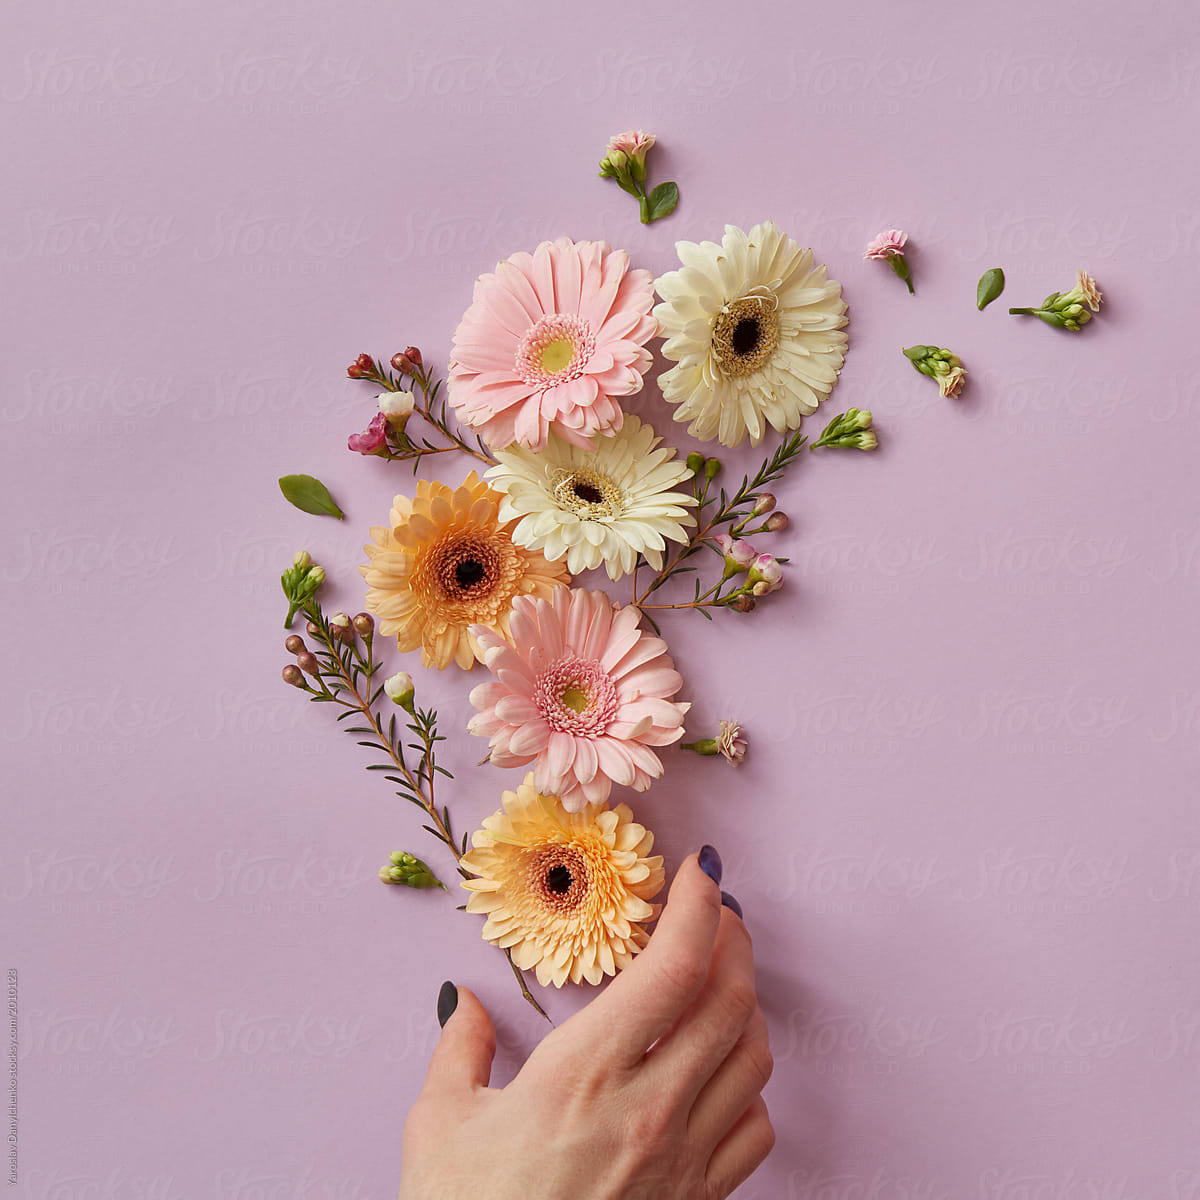 Composition from different gerberas and branches with pink flowers on a pink background